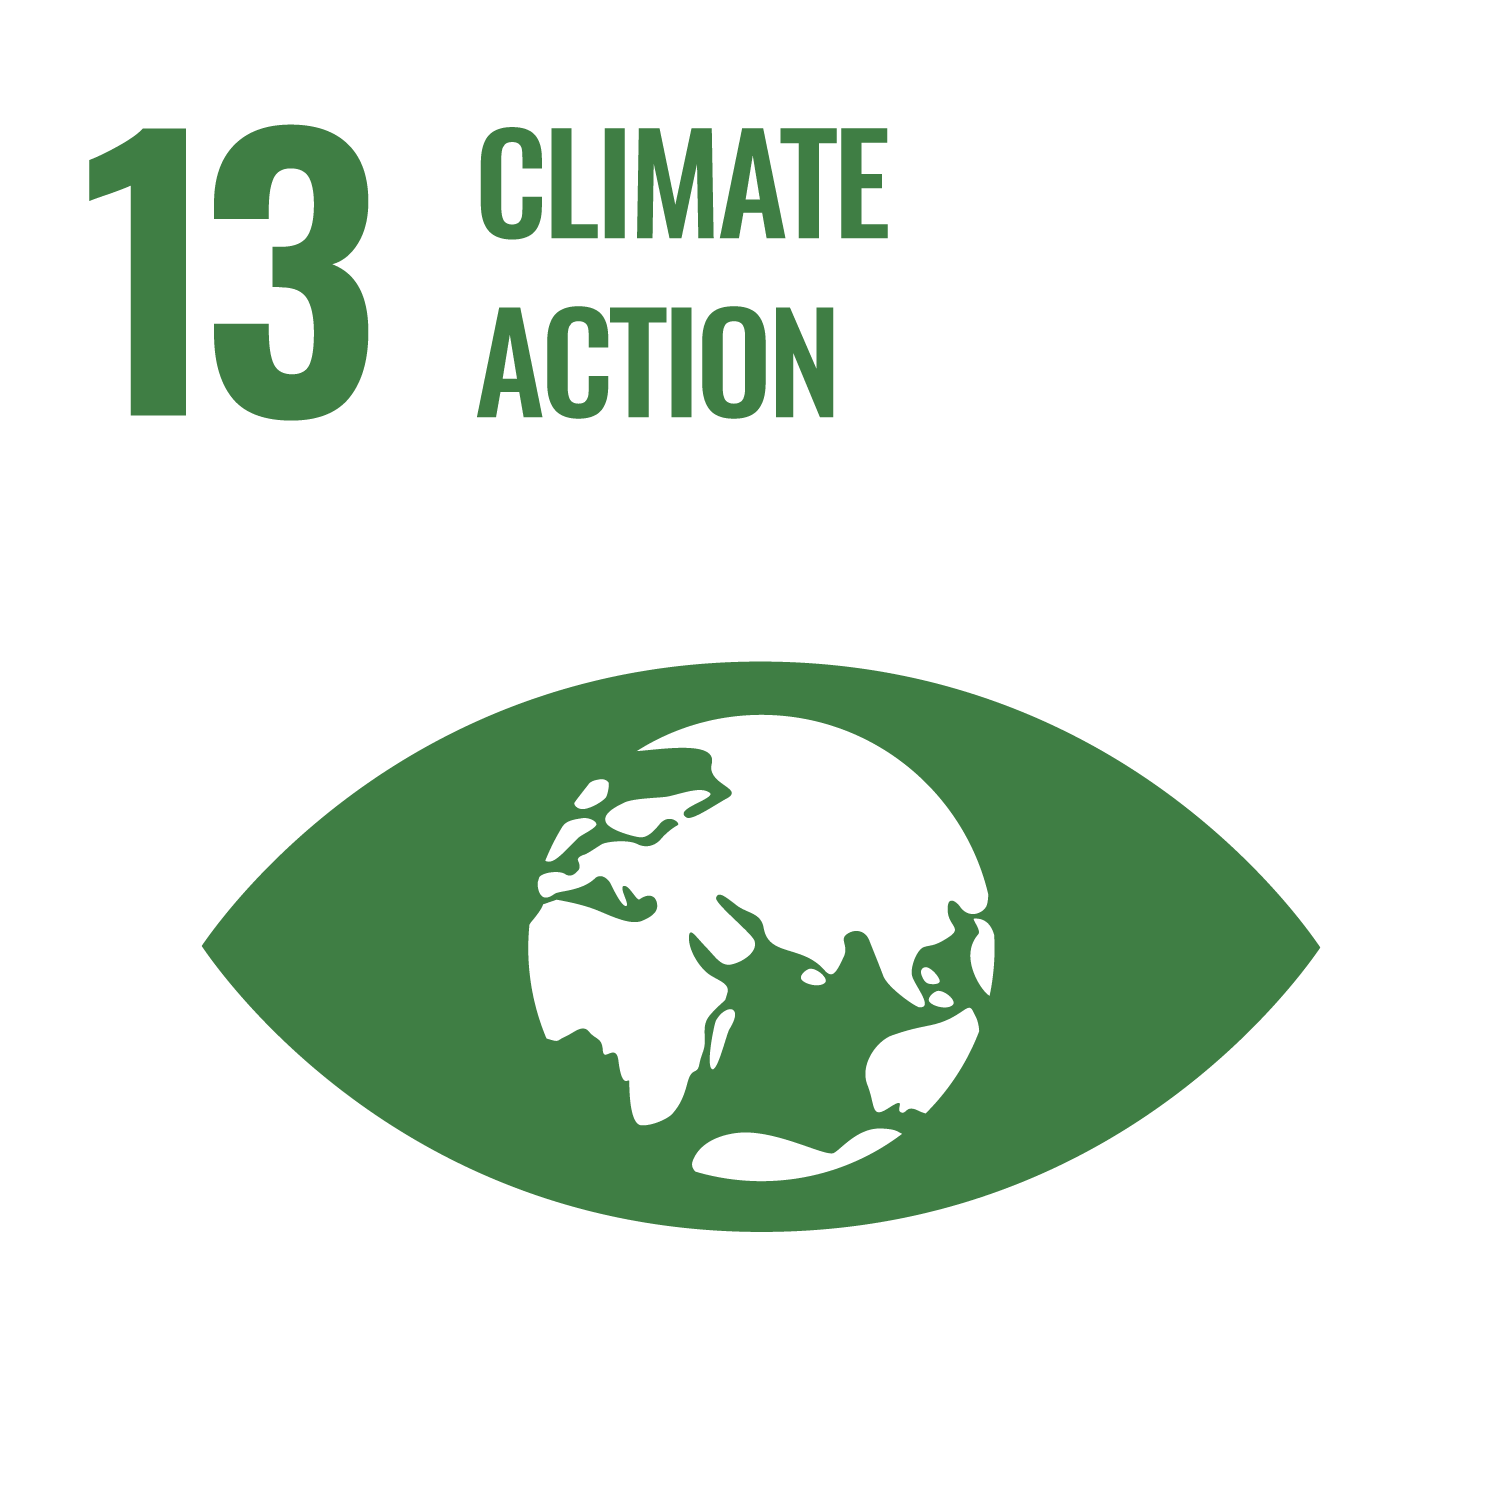 a green eye with a globe represents Goal 13: Climate Action